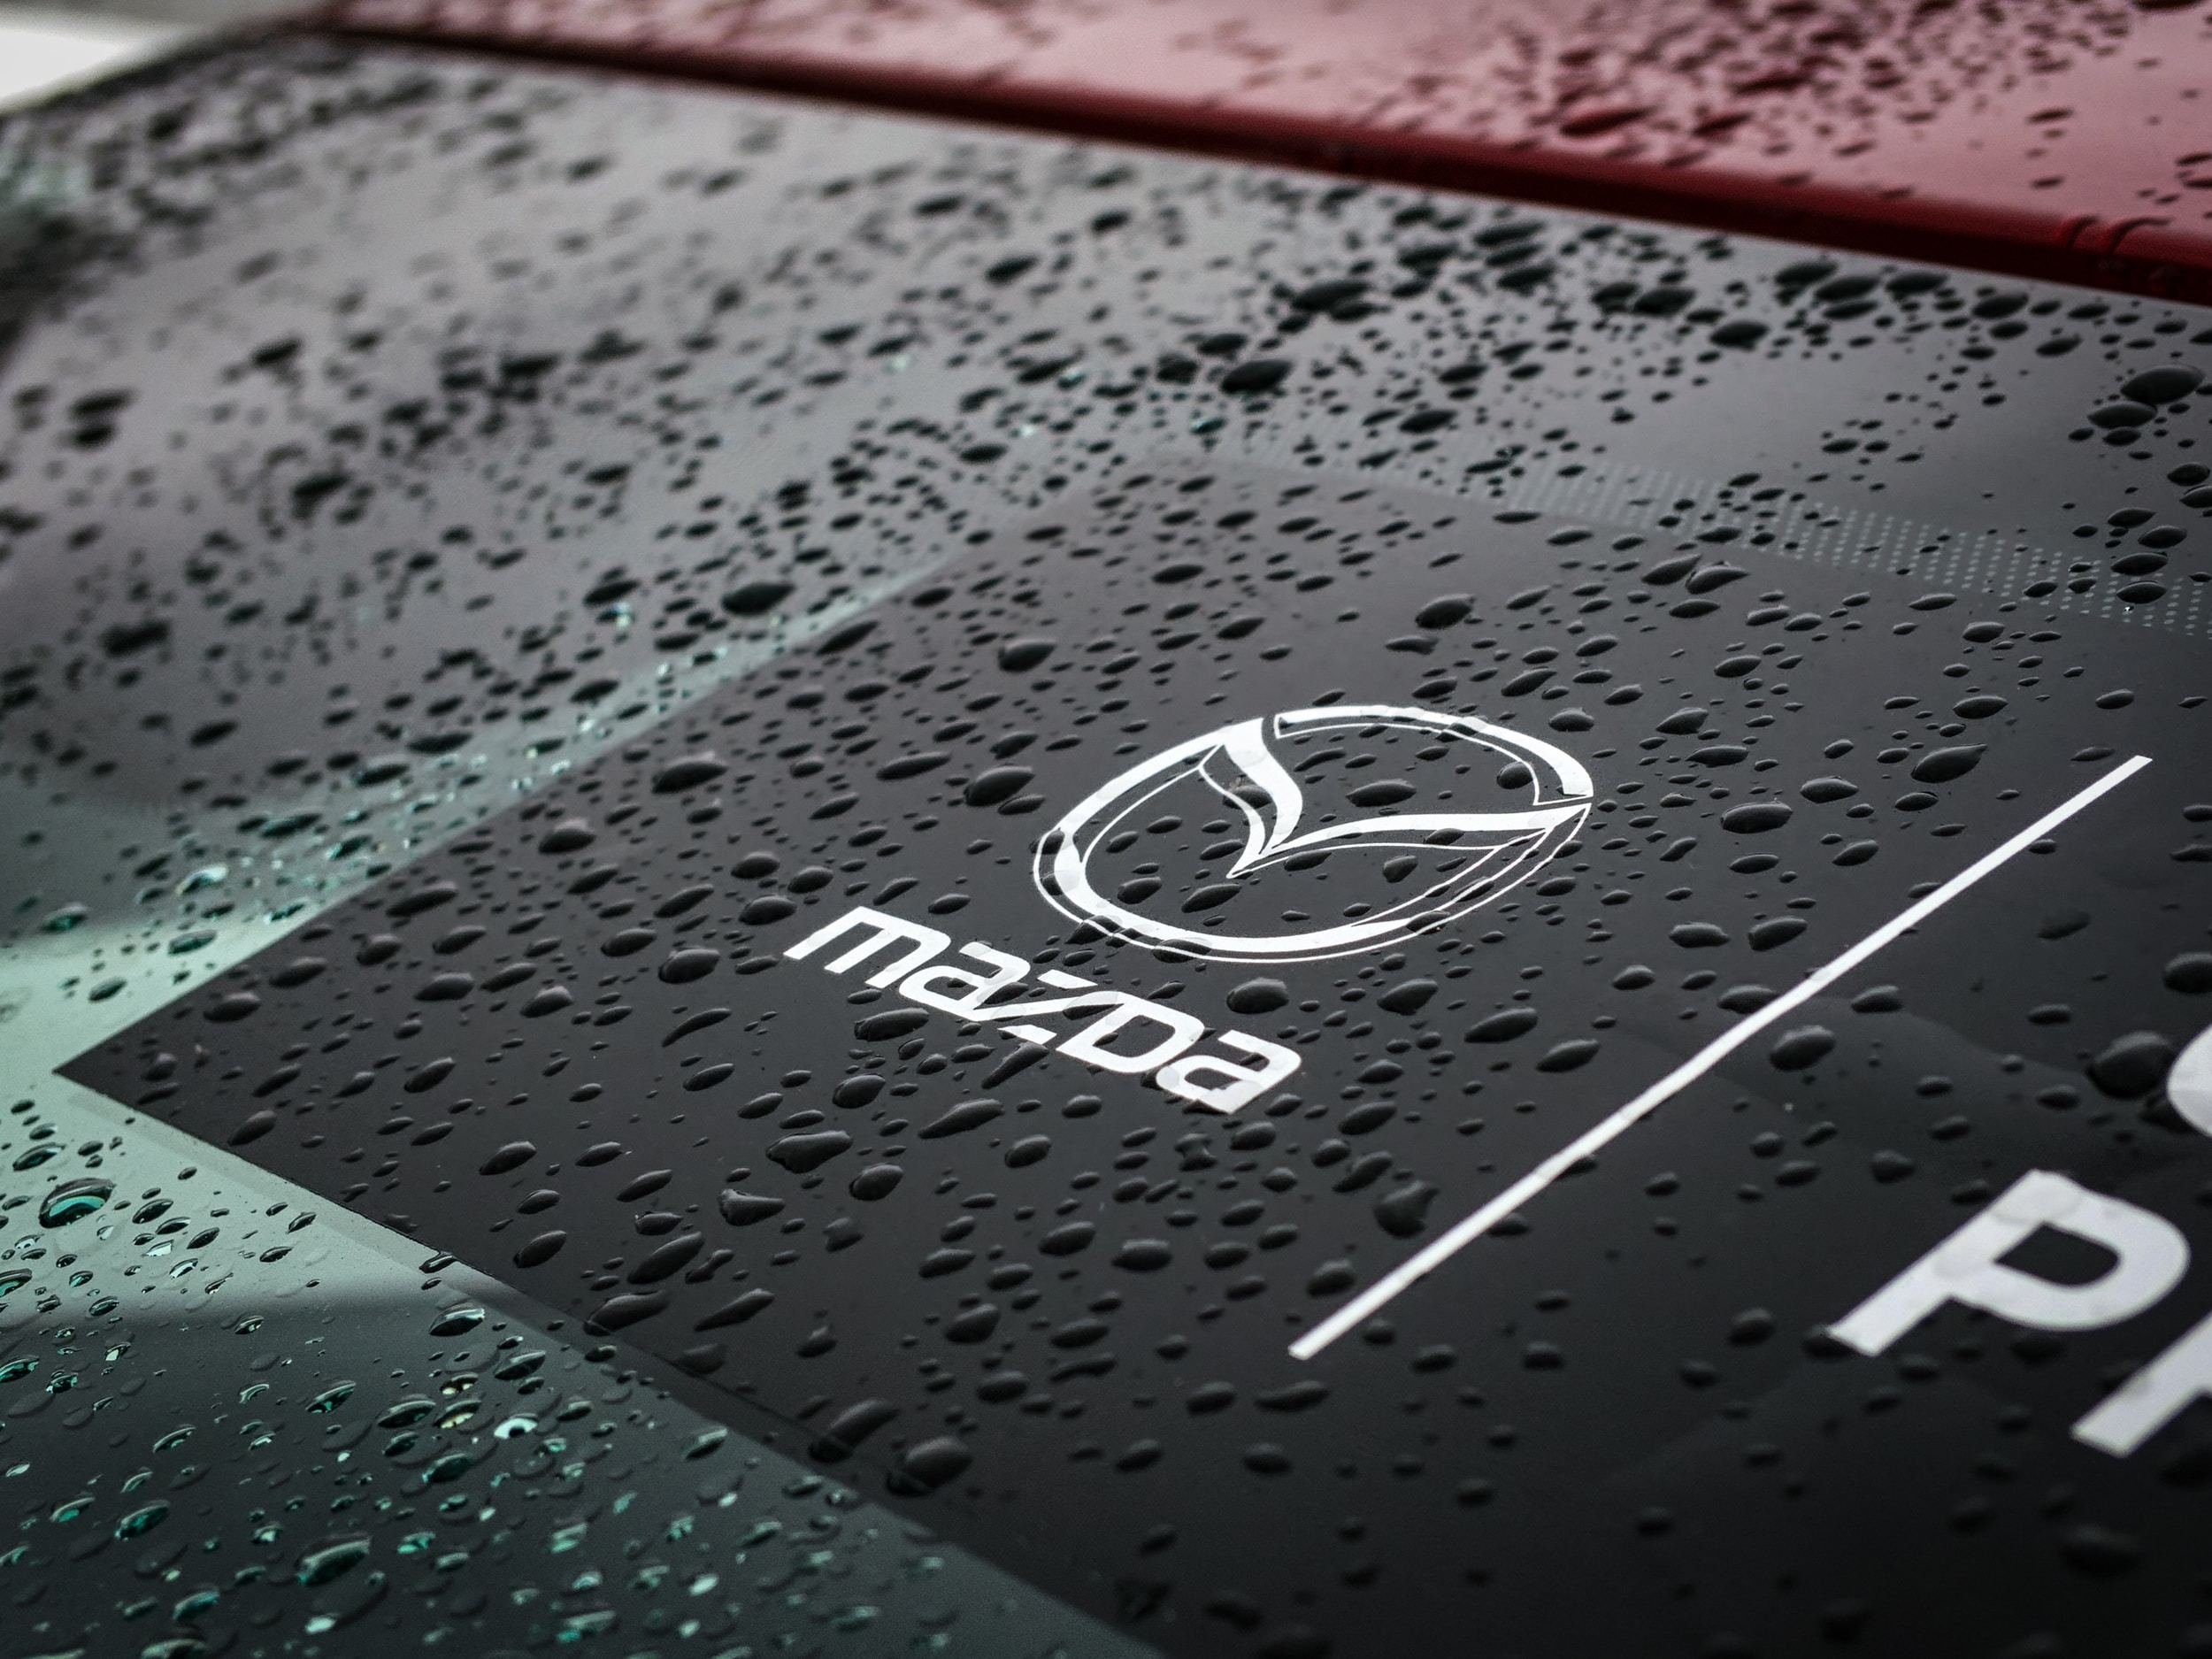 The meaning of Mazda.